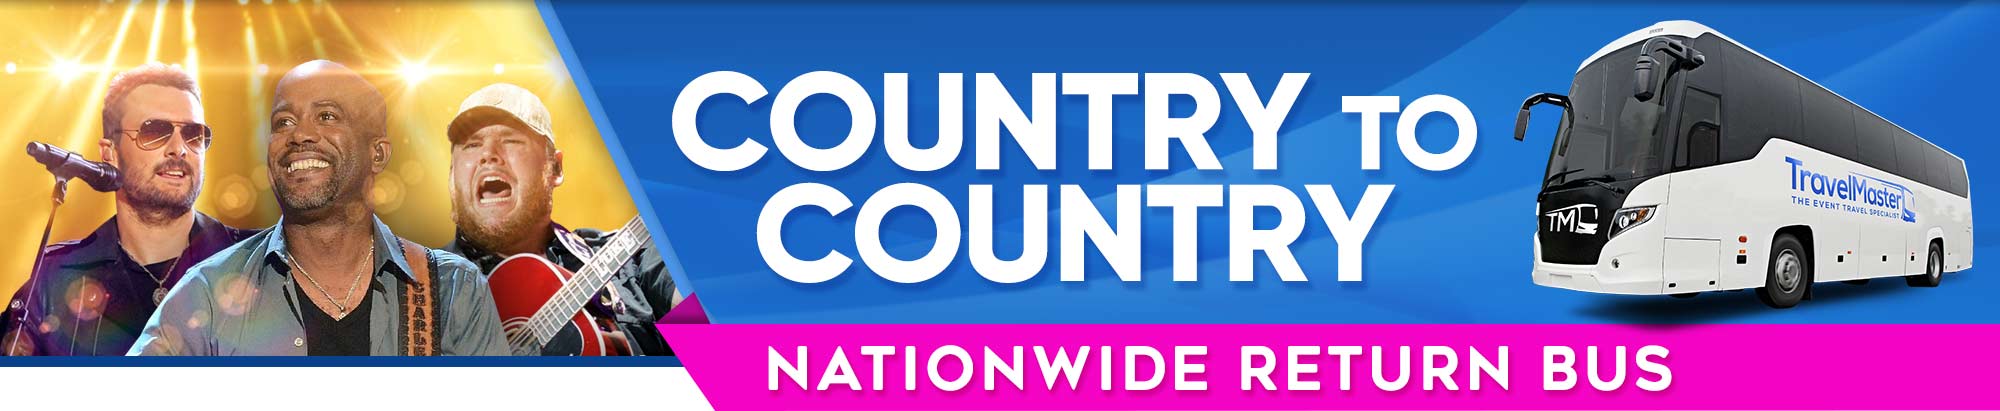 Bus to Country to Country 3Arena | Nationwide Return | 13th-15th Mar 2020